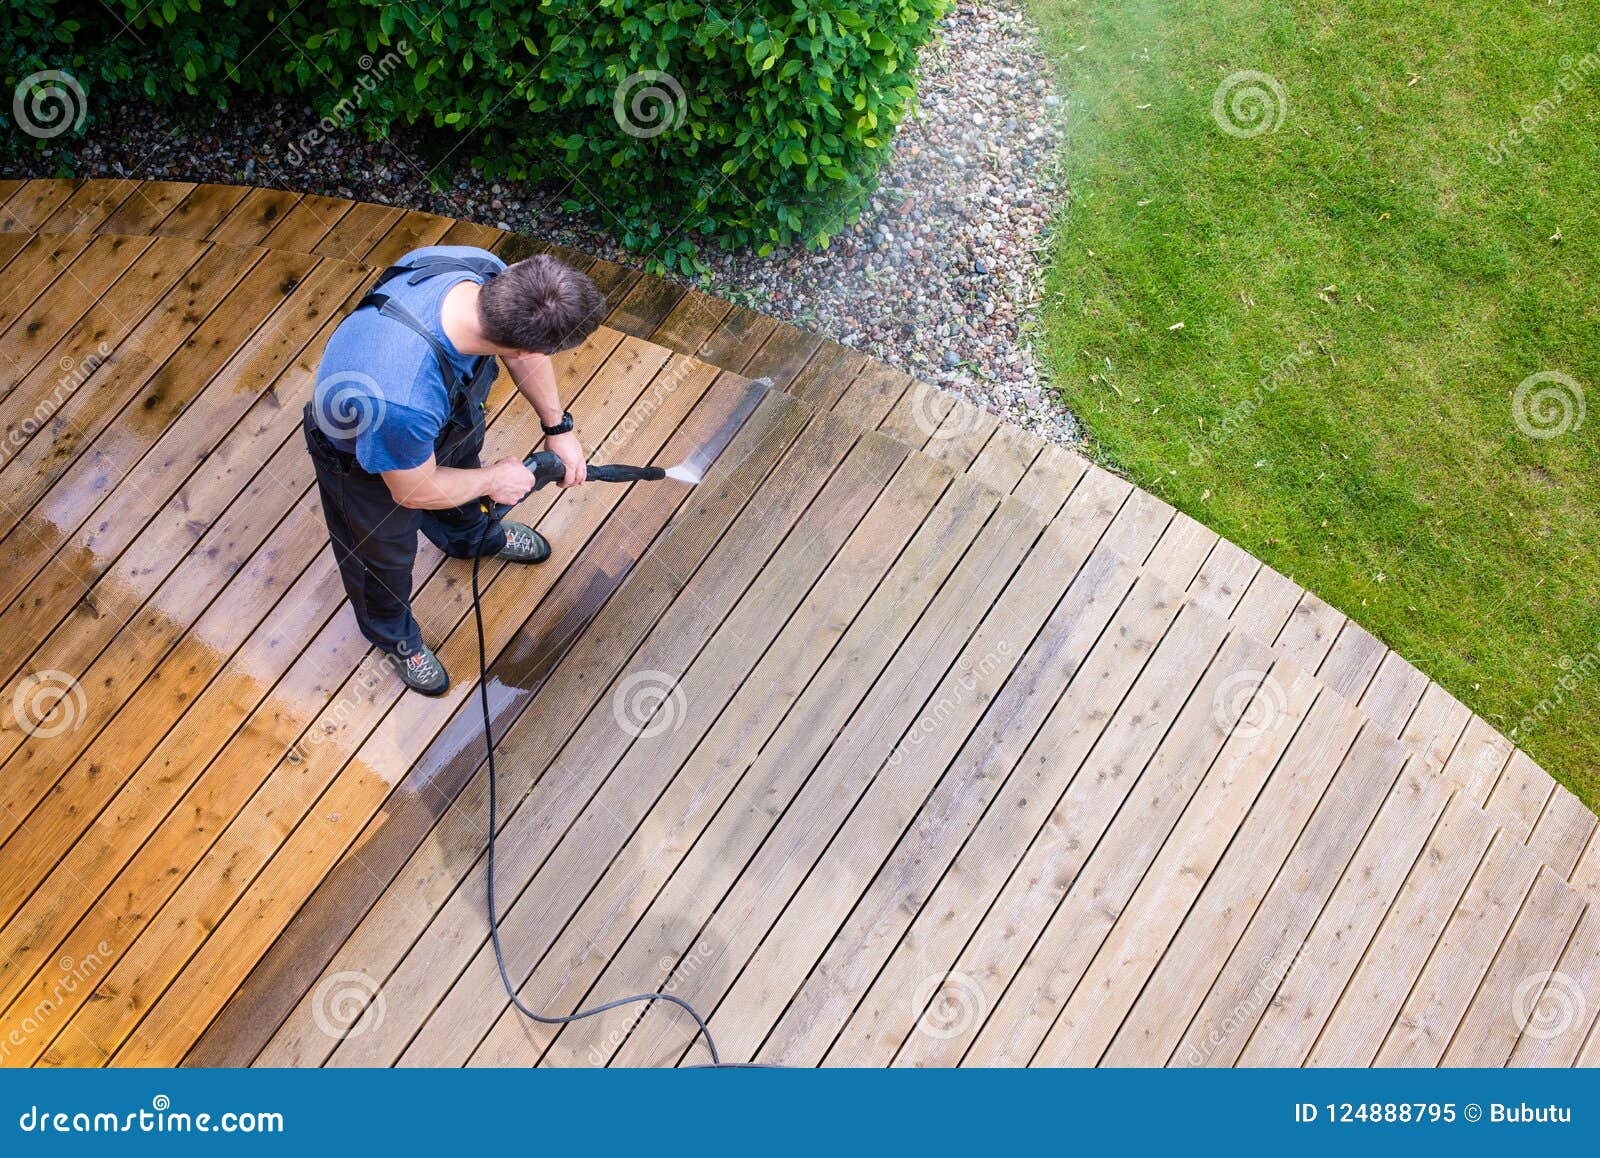 man cleaning terrace with a power washer - high water pressure c